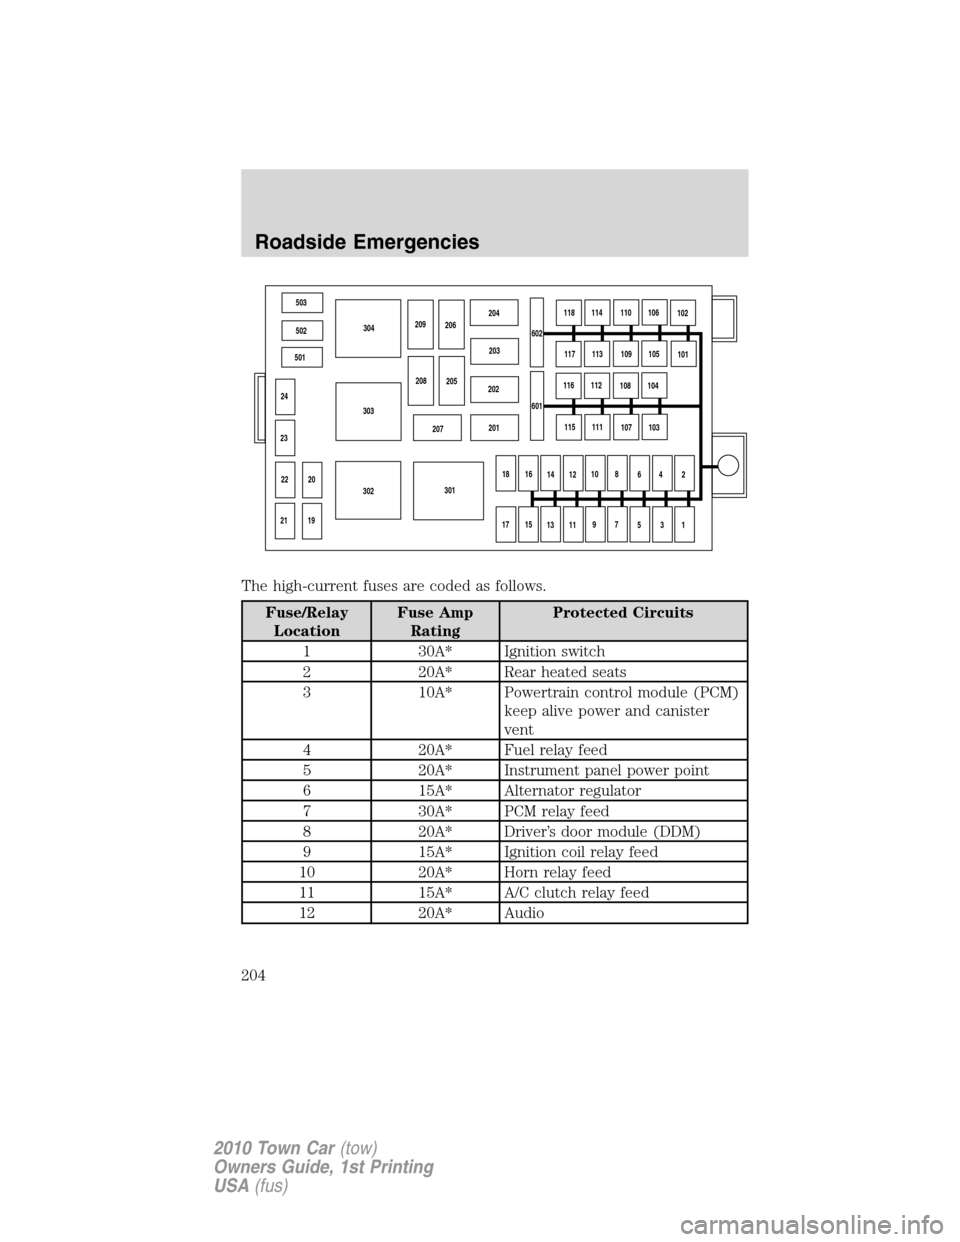 LINCOLN TOWN CAR 2010  Owners Manual The high-current fuses are coded as follows.
Fuse/Relay
LocationFuse Amp
RatingProtected Circuits
1 30A* Ignition switch
2 20A* Rear heated seats
3 10A* Powertrain control module (PCM)
keep alive powe